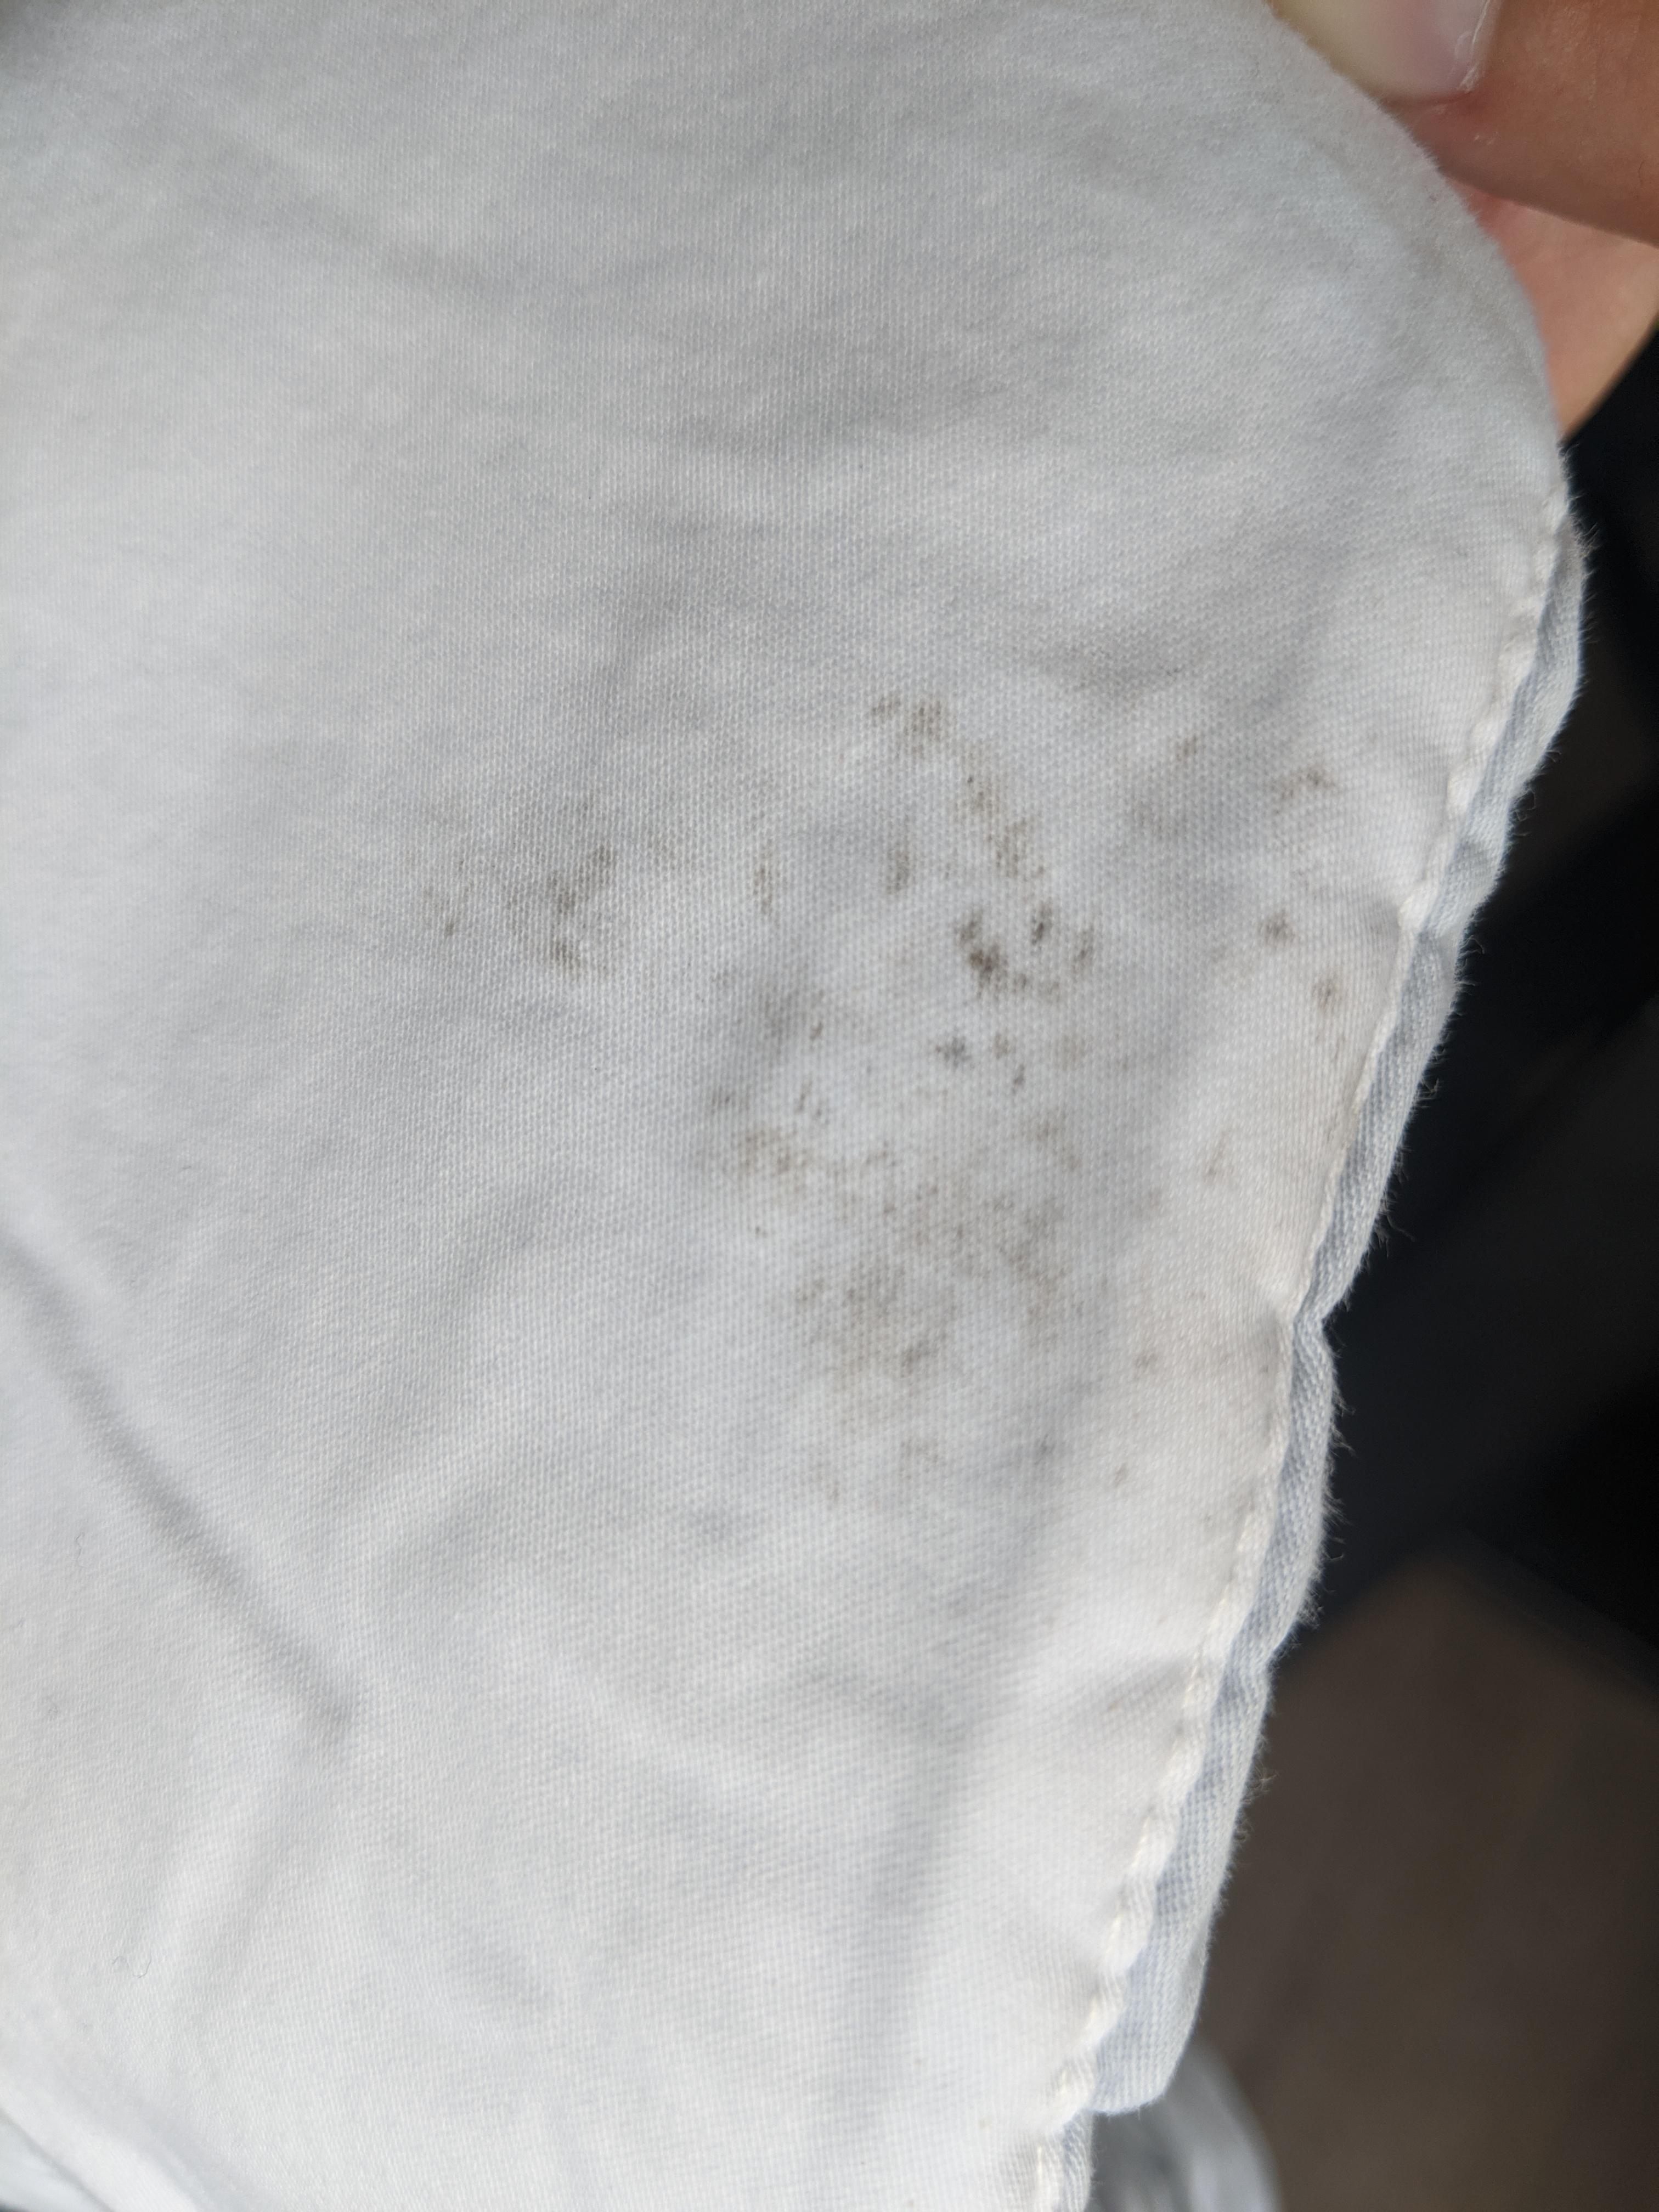 Why do I keep getting spots that look like mold on my clothes after ...